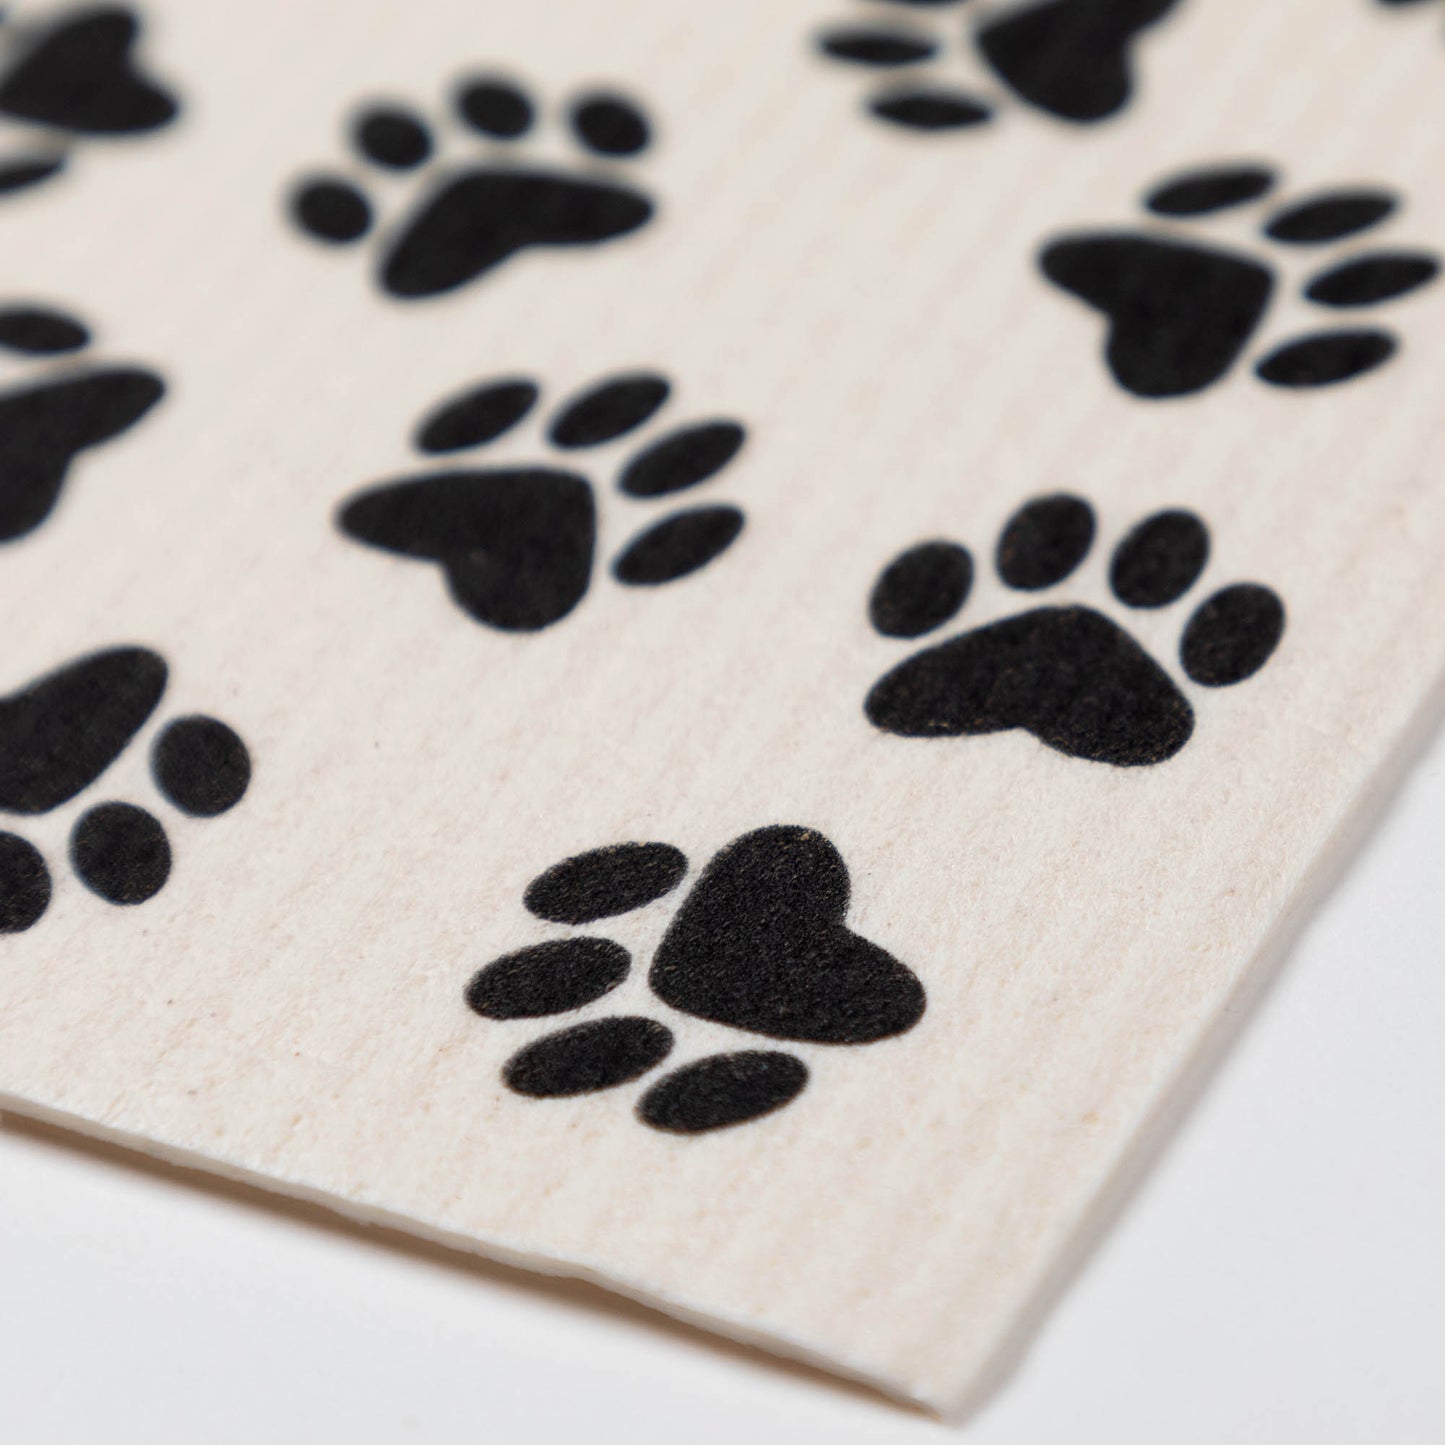 All Over Paws Biodegradable Dishcloth - Set of 4